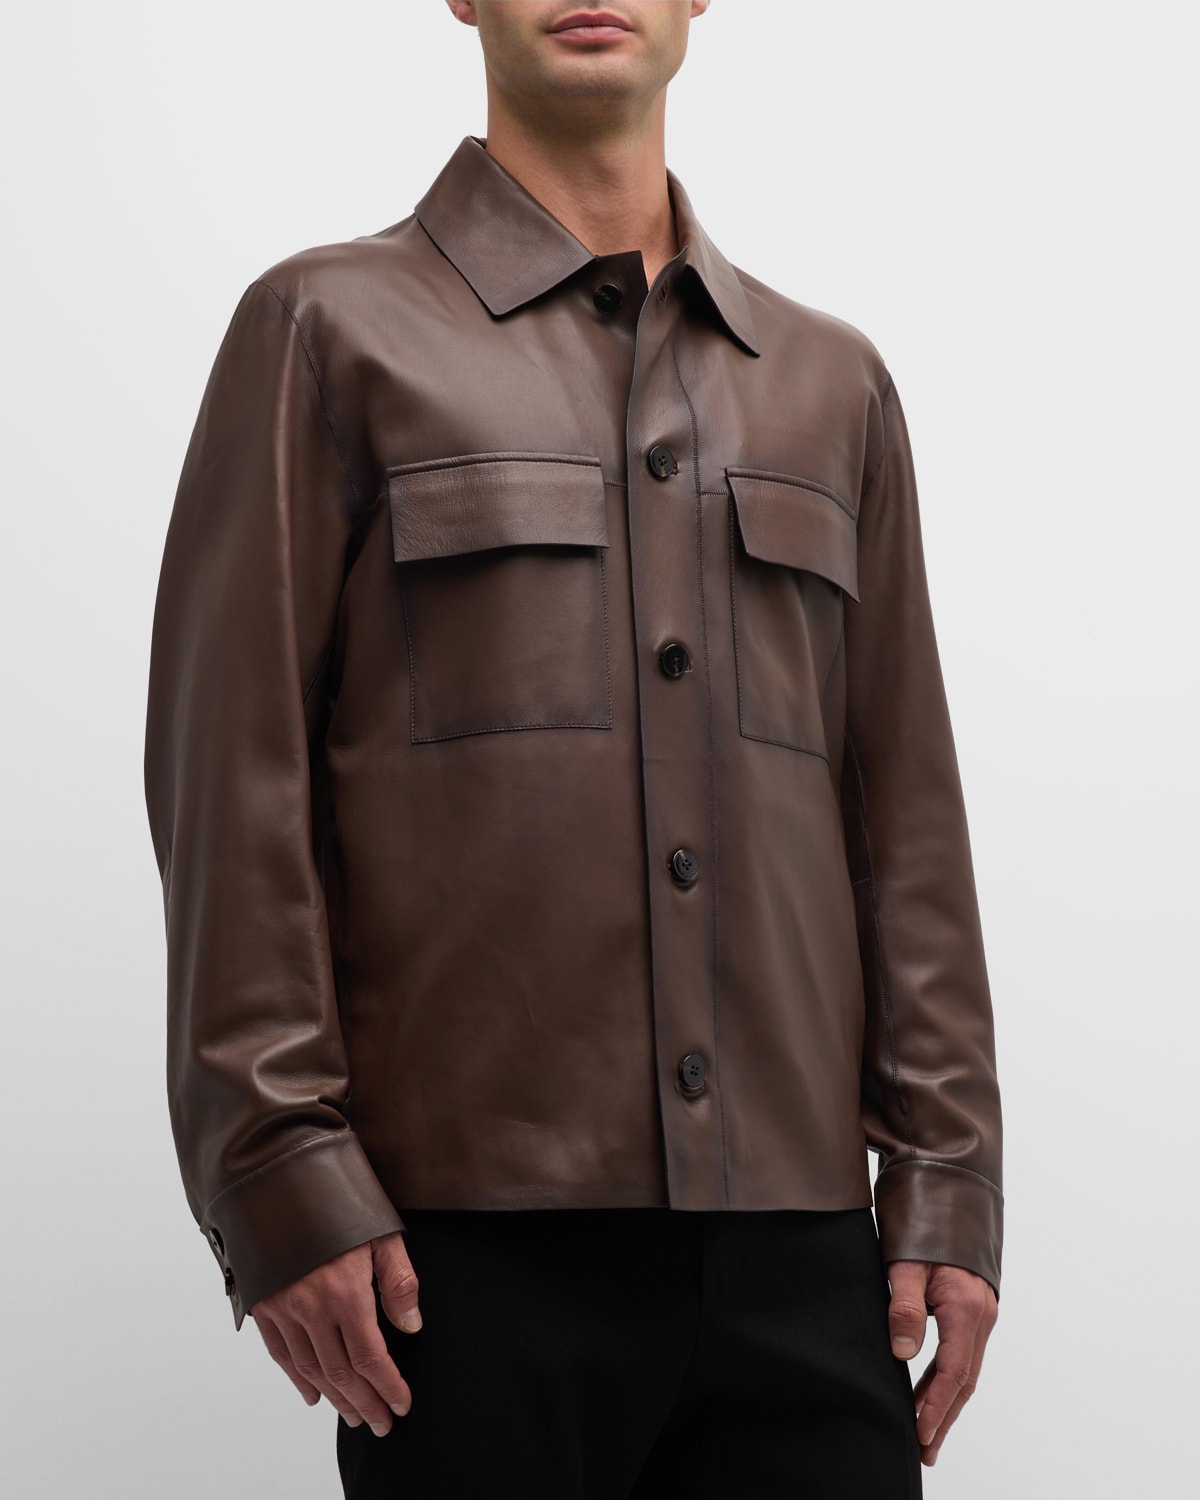 HUGO BOSS MEN'S LEATHER OVERSHIRT WITH CHEST POCKETS